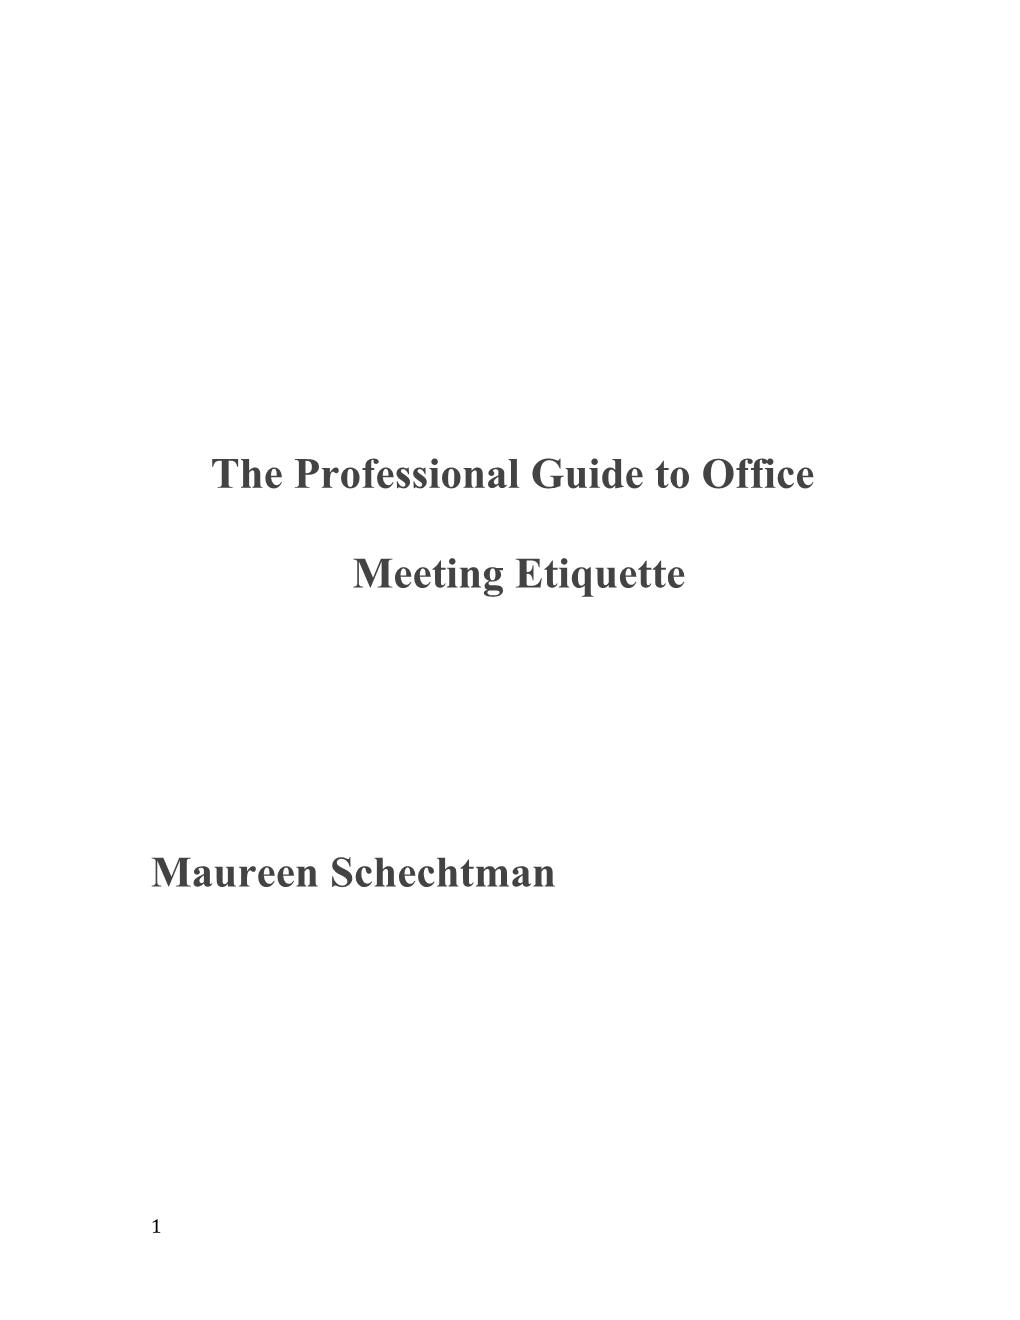 The Professional Guide to Office